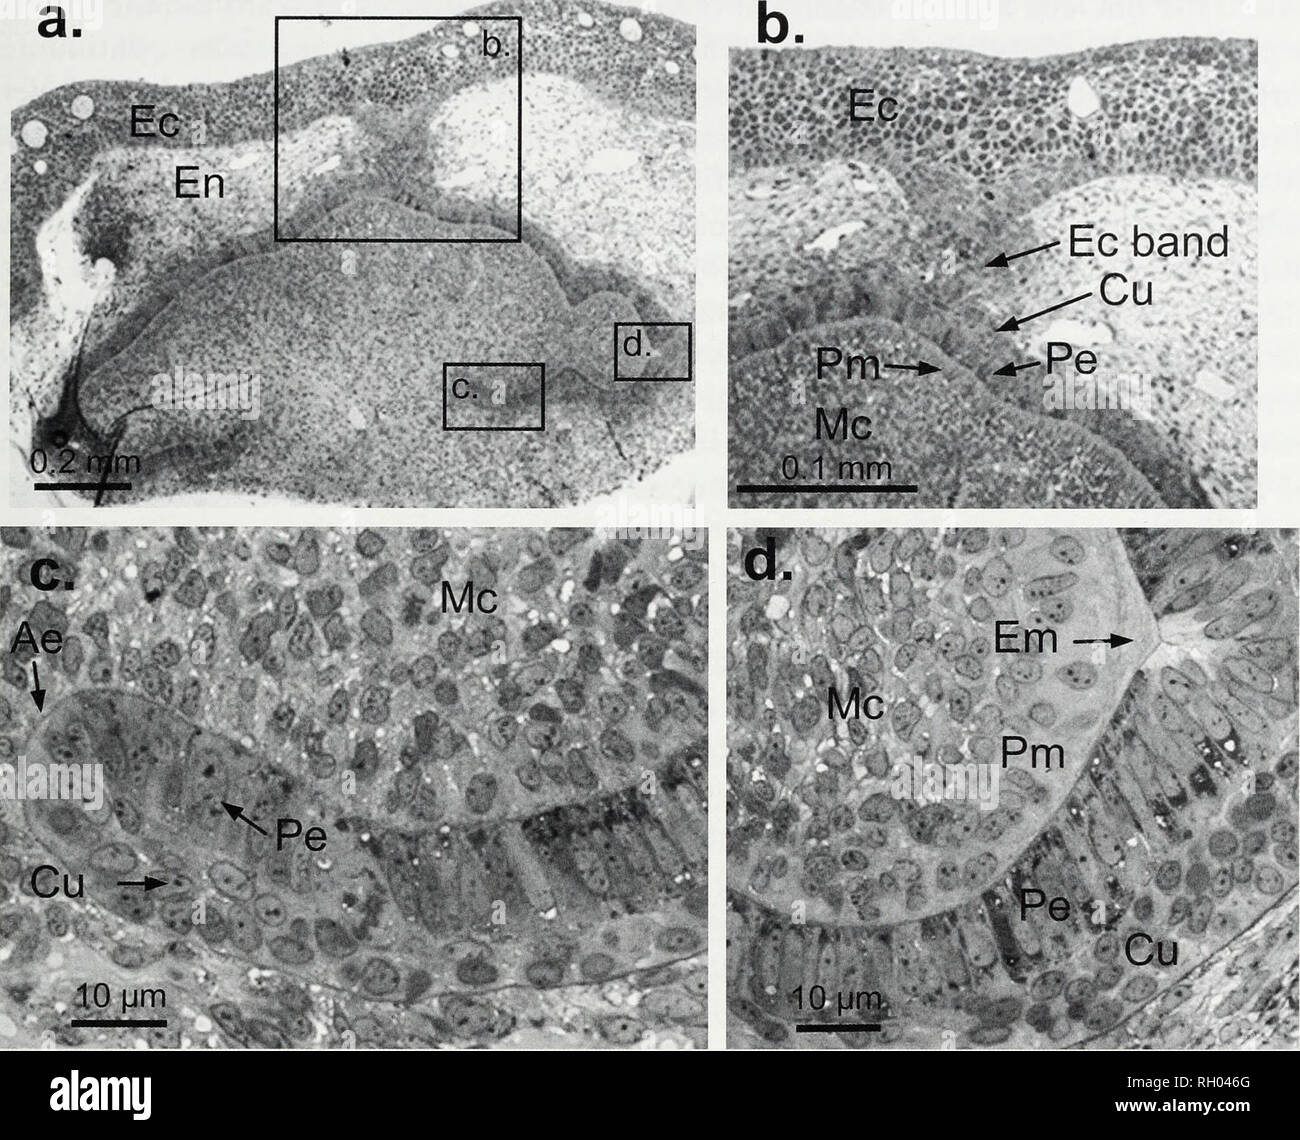 . Bulletin. Science. CAUDAL SPINE REPLACEMENT IN ROUND STINGRAYS 121 â Â» Ec band. Fig. 3. Photomicrographs of primordial spine bud in the round stingray, a) A cross section of the dorsal surface of the tail of Urobatis halleri showing a developing spine primordium. The inserted boxes (b-d) indicate areas that are shown in figures 3b-d at higher magnification. Outer layer of ectoderm (Ec); endoderm (En); cuboidal ectoderm (Cu); ectodermally-derived pseudostratified colum- nar epithelium (Pe); mesodermally-derived pseudostratified columnar epithelium (Pm); mesenchymal- like cells (Mc); enameloi Stock Photo